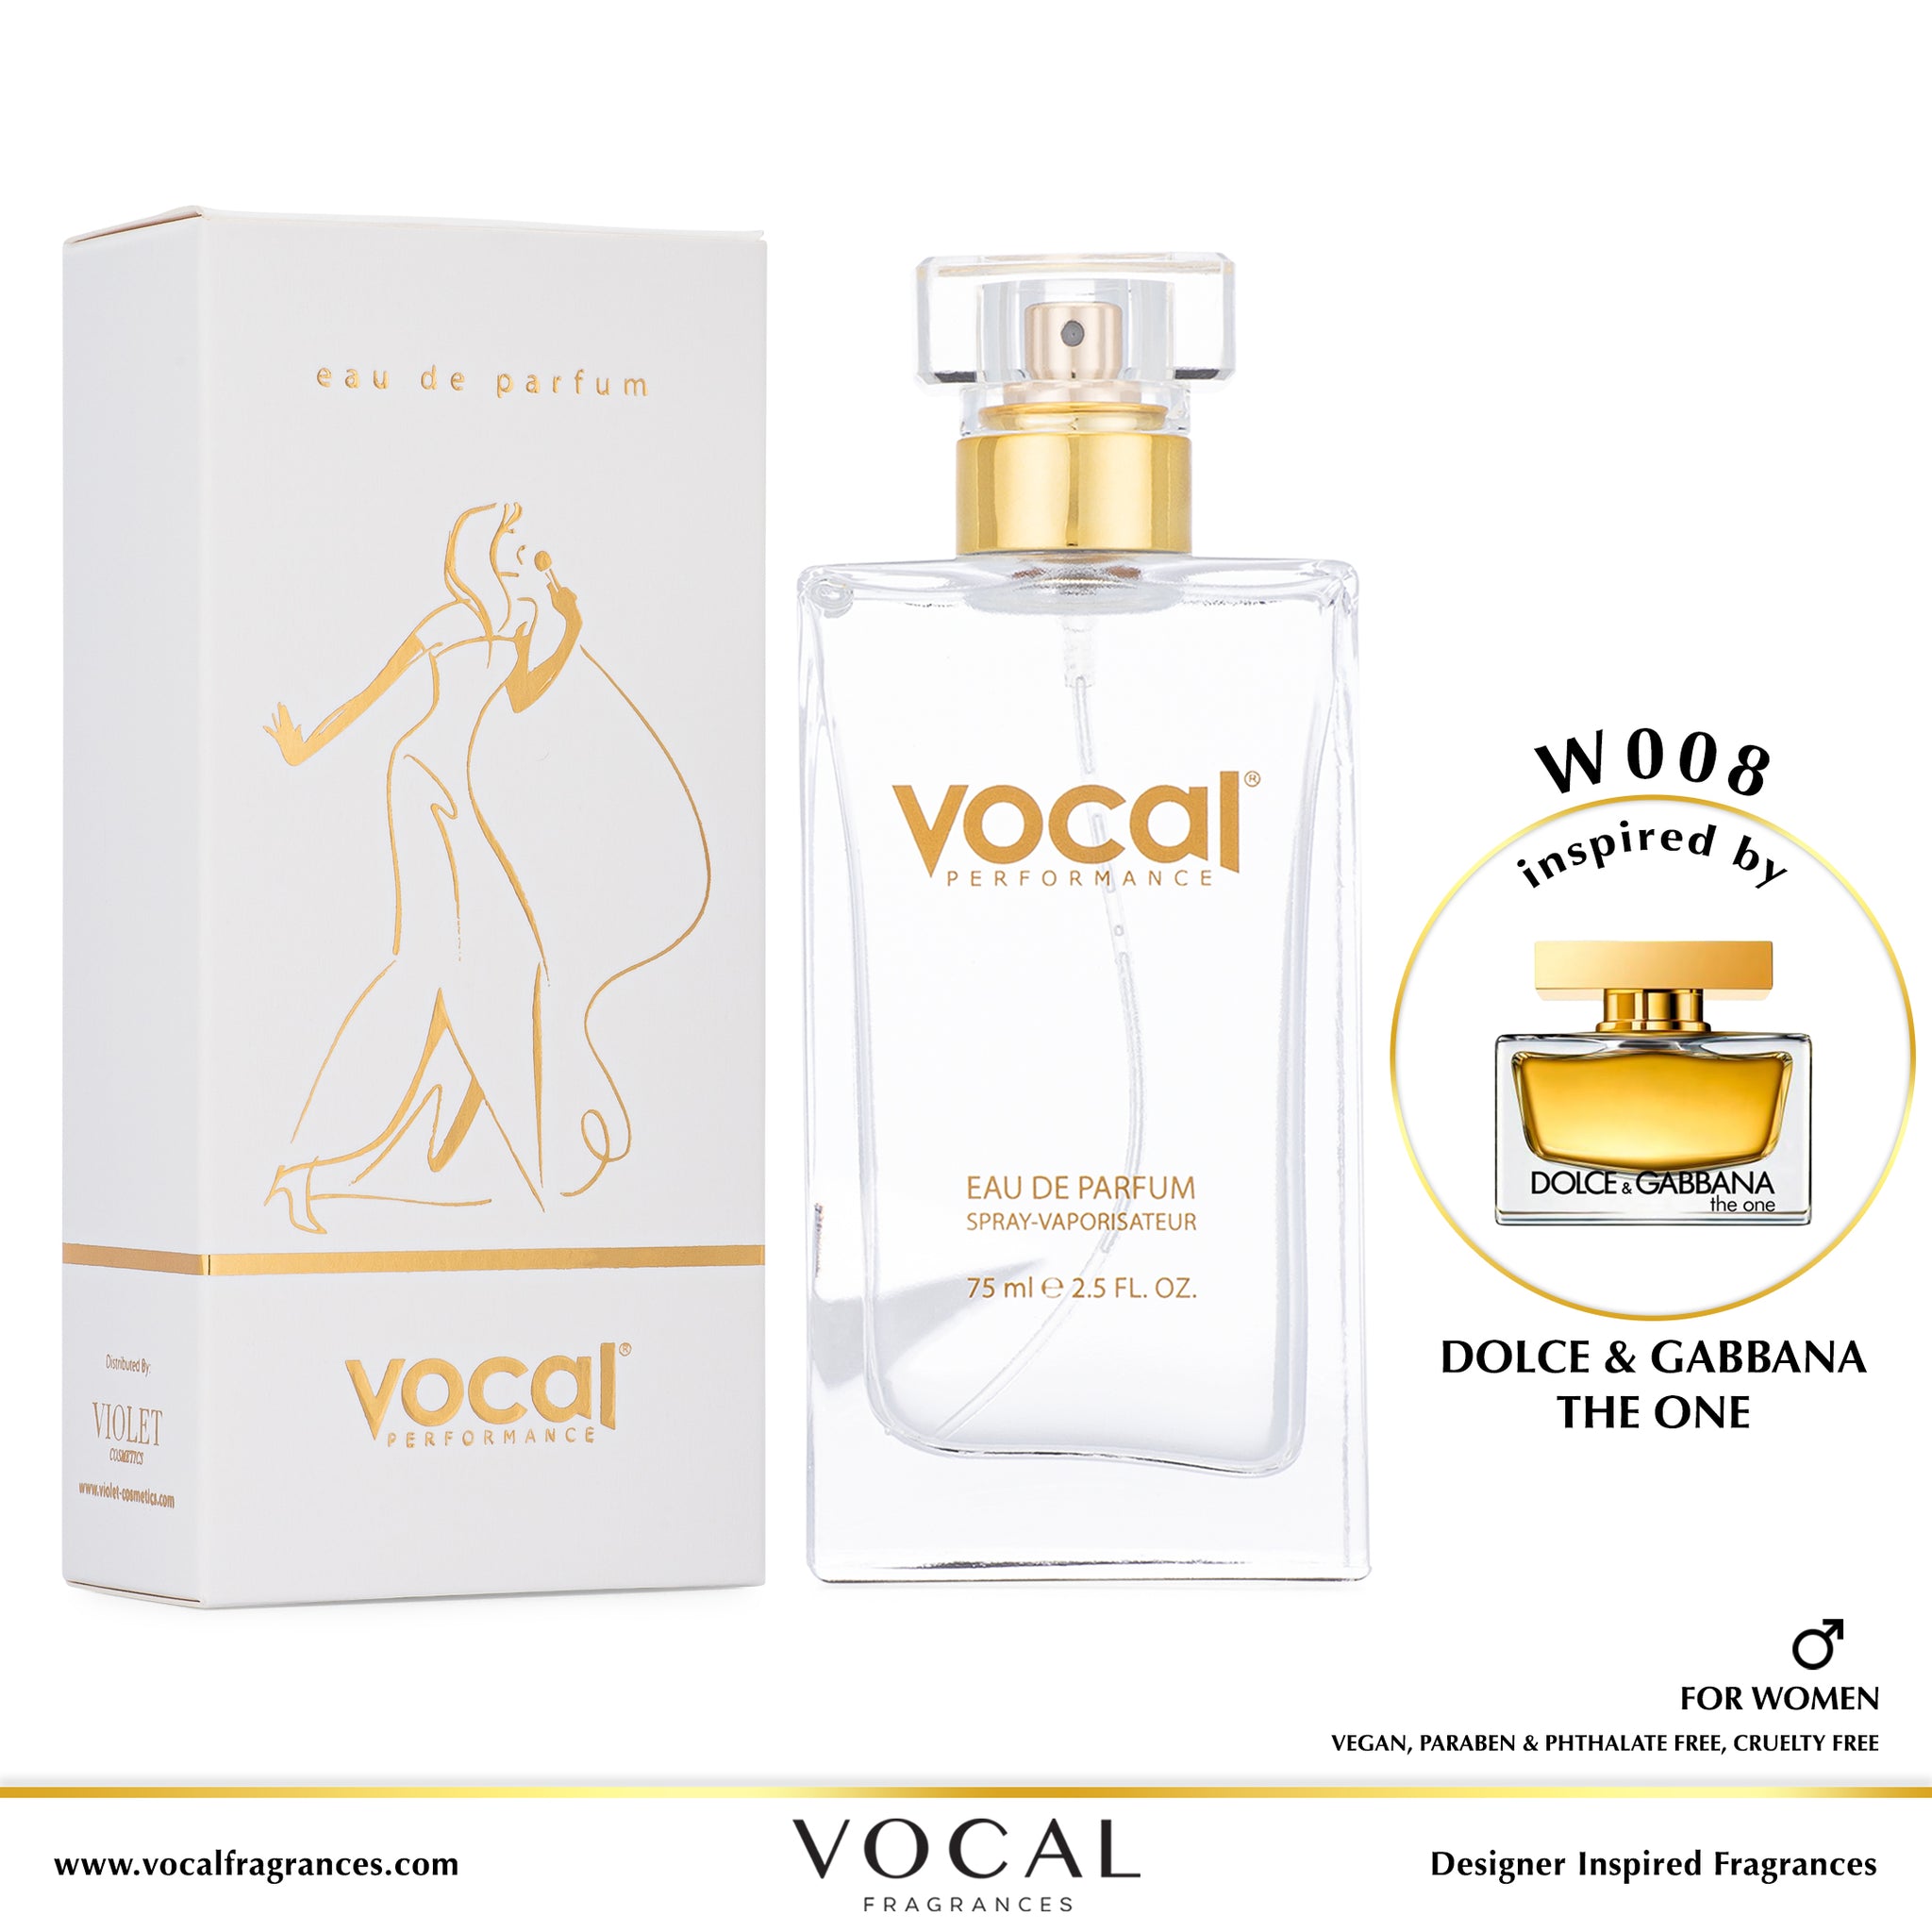 W008 Vocal Performance Eau De Parfum For Women Inspired by Dolce Gabbana The One